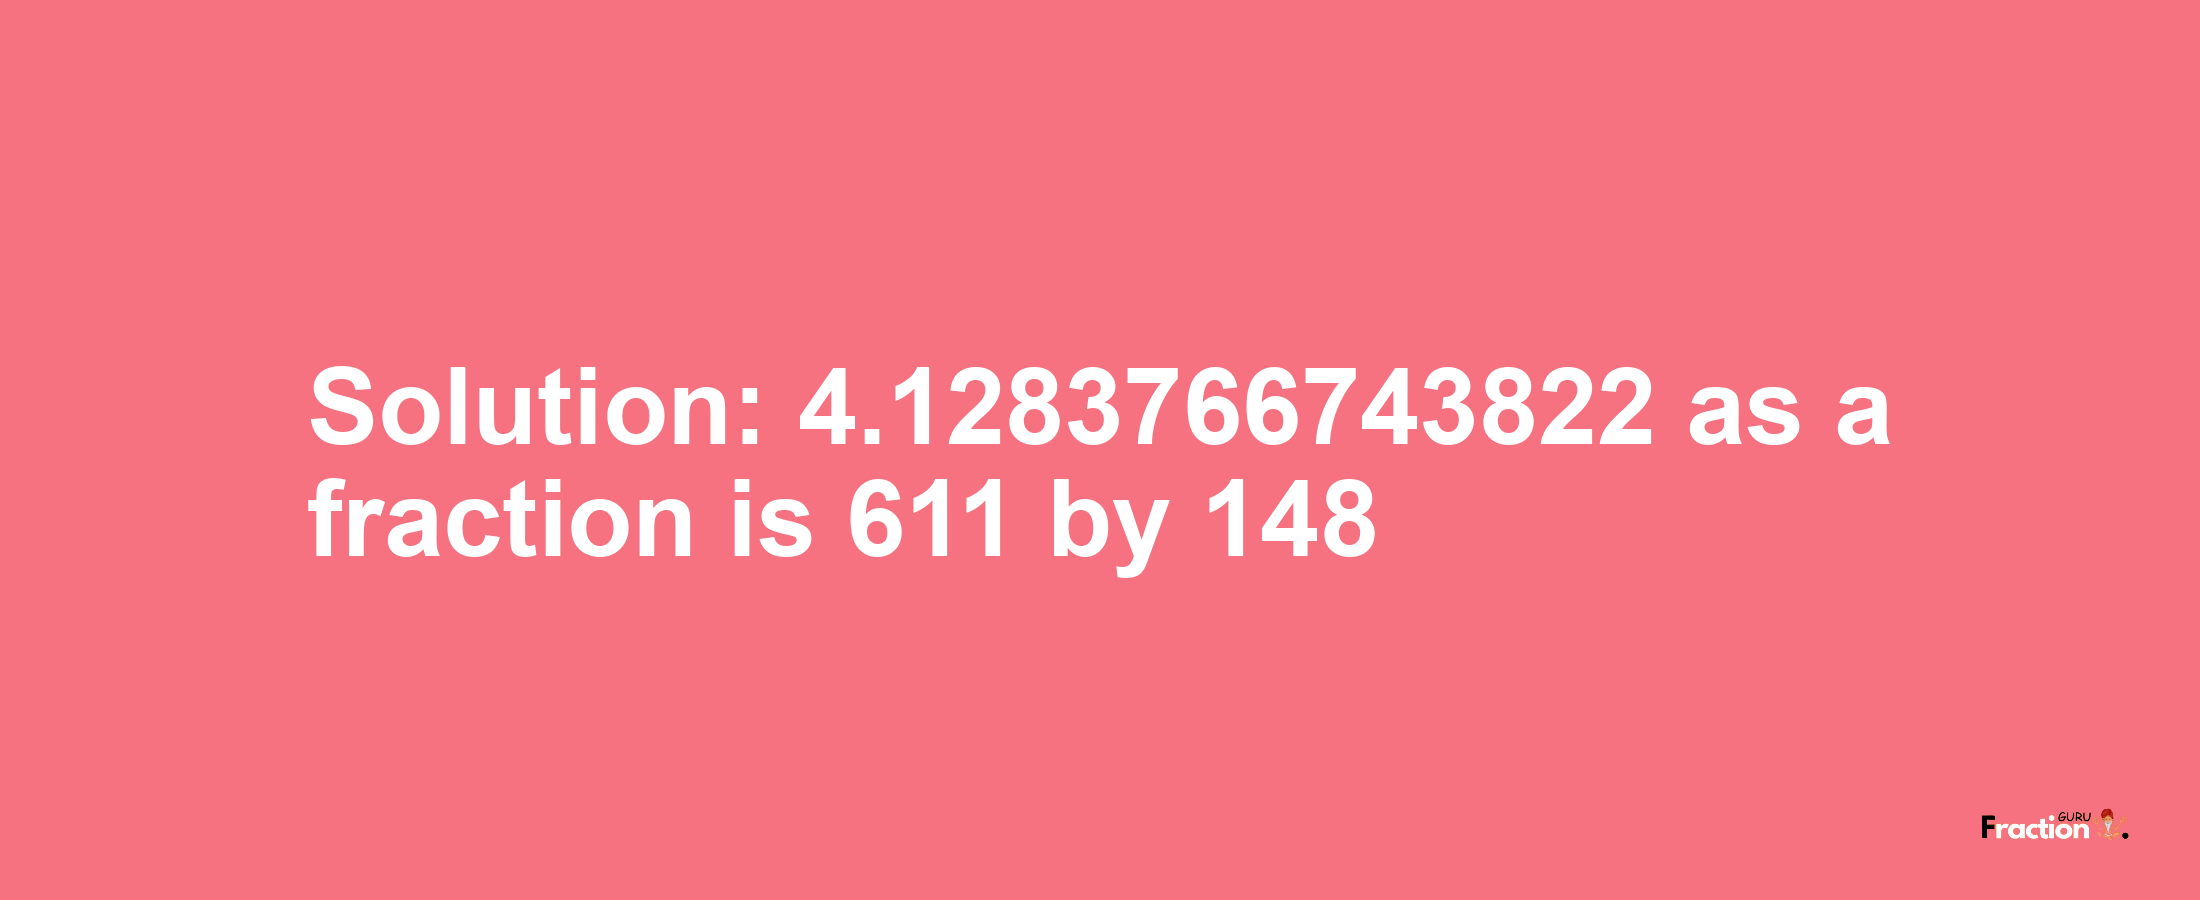 Solution:4.1283766743822 as a fraction is 611/148